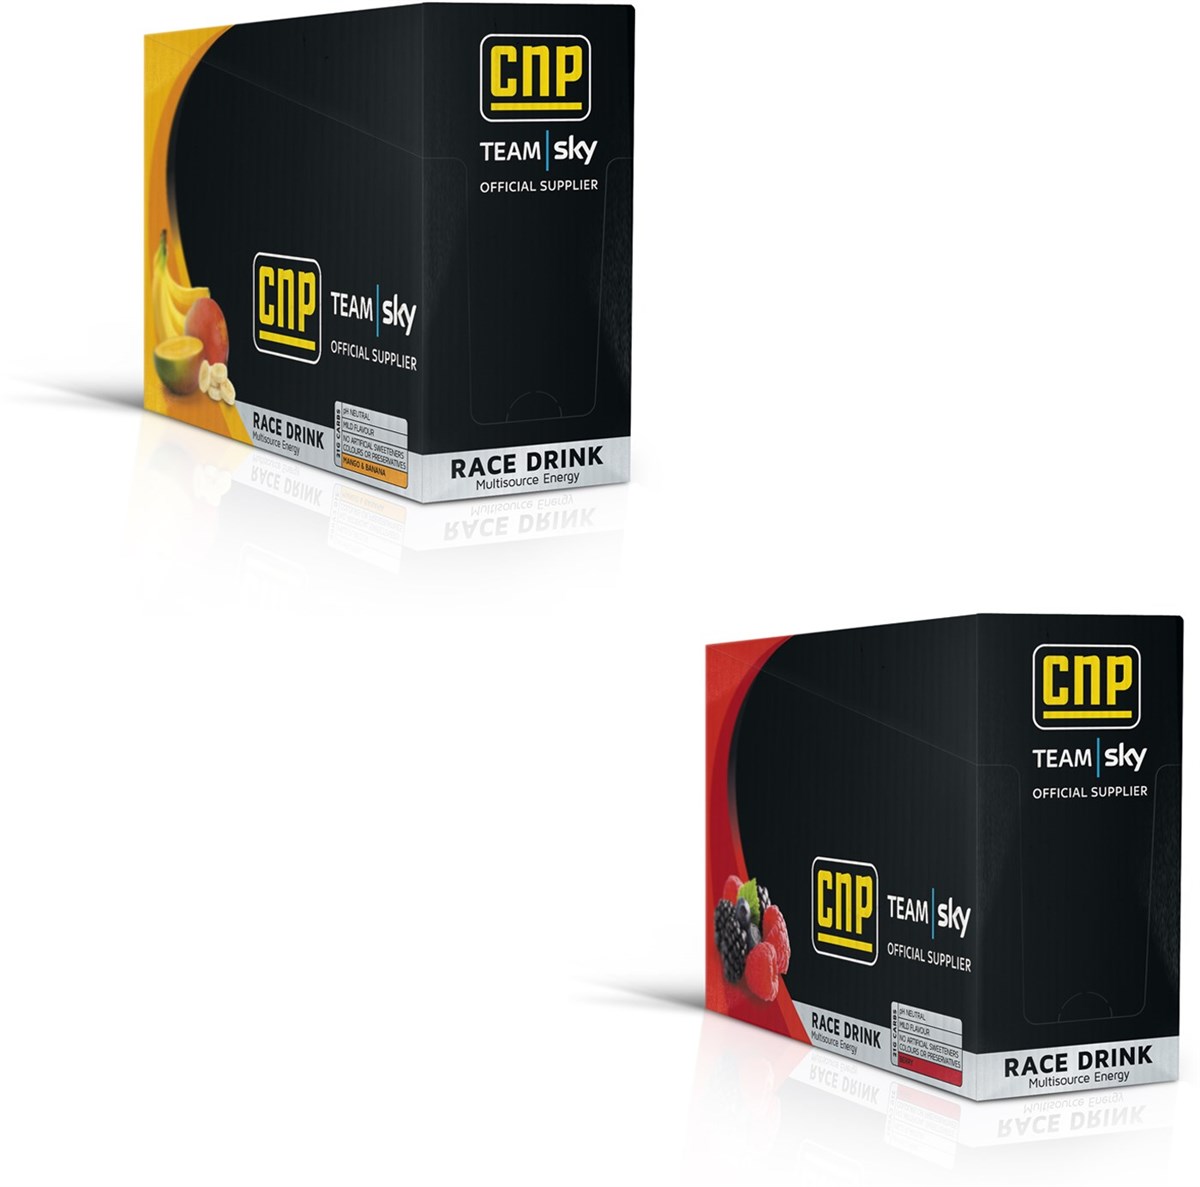 CNP Race Drink Multisource Energy Powder Drink - 22g x Box of 20 product image